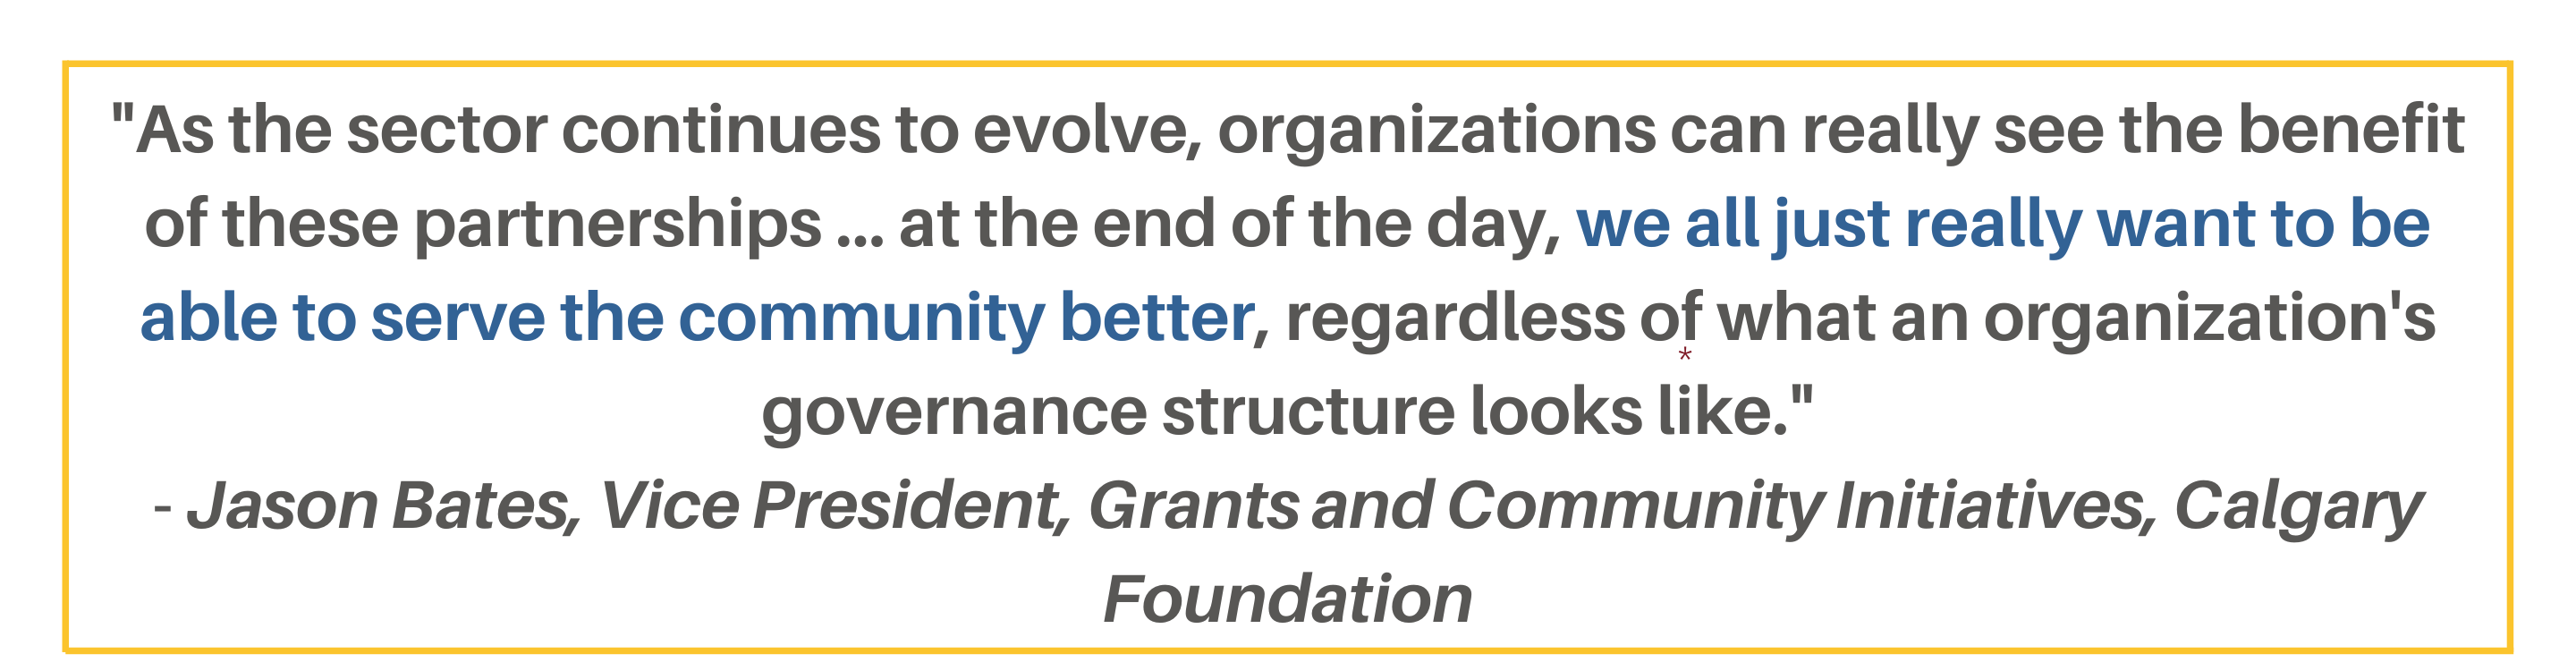 "As the sector continues to evolve, organizations can really see the benefit of these partnerships ... at the end of the day, we all just really want to be able to serve the community better, regardless of what an organization's governance structure looks like." - Jason Bates, Vice President, Grants and Community Initiatives, Calgary Foundation